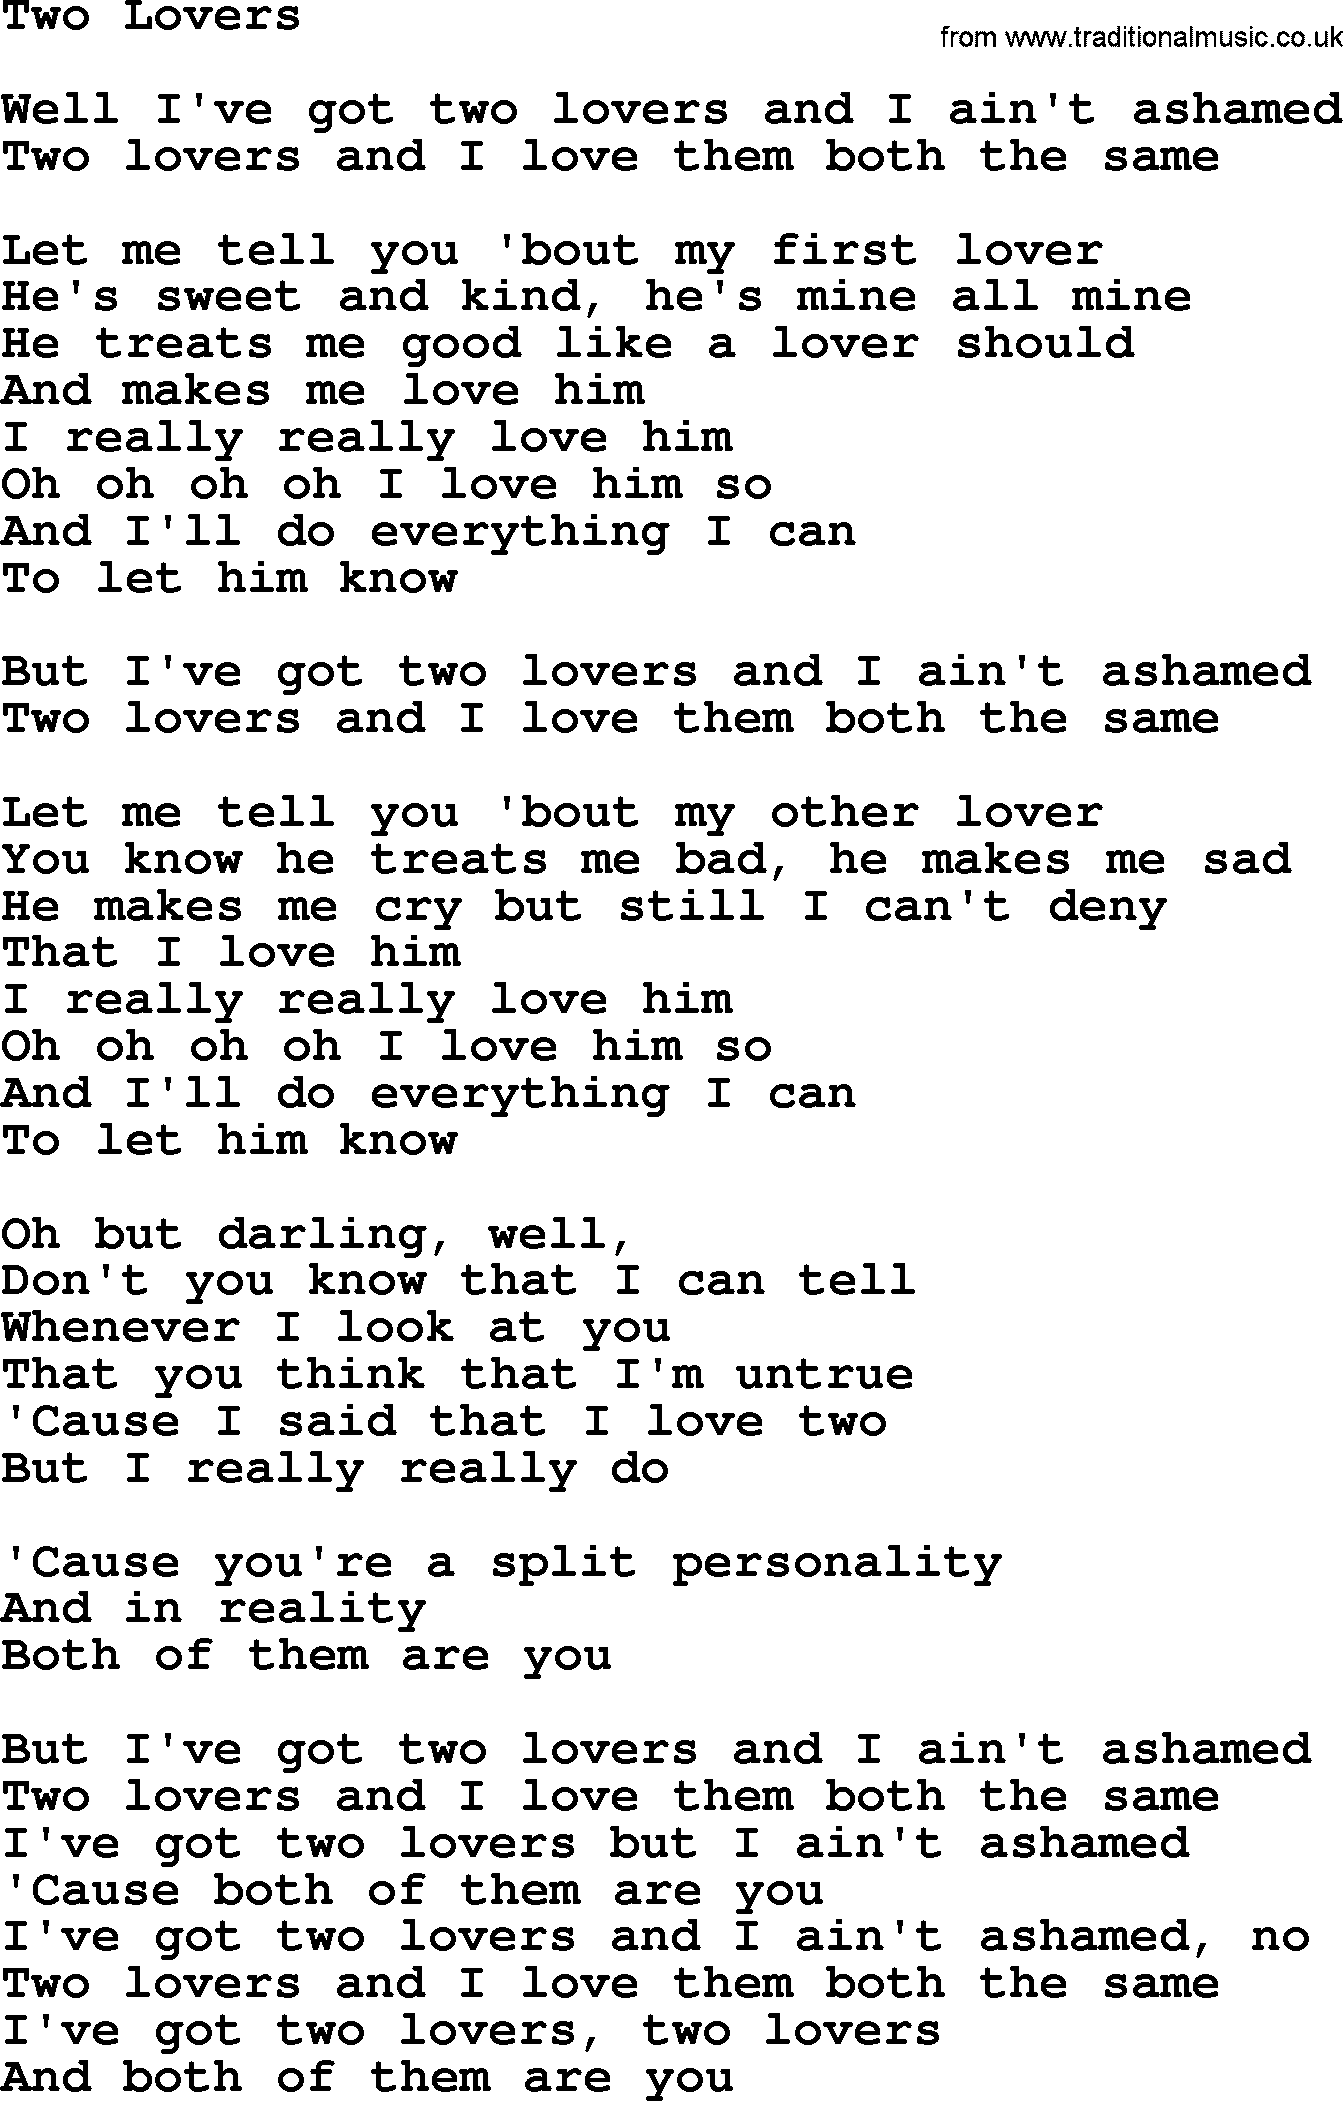 Dolly Parton song Two Lovers.txt lyrics